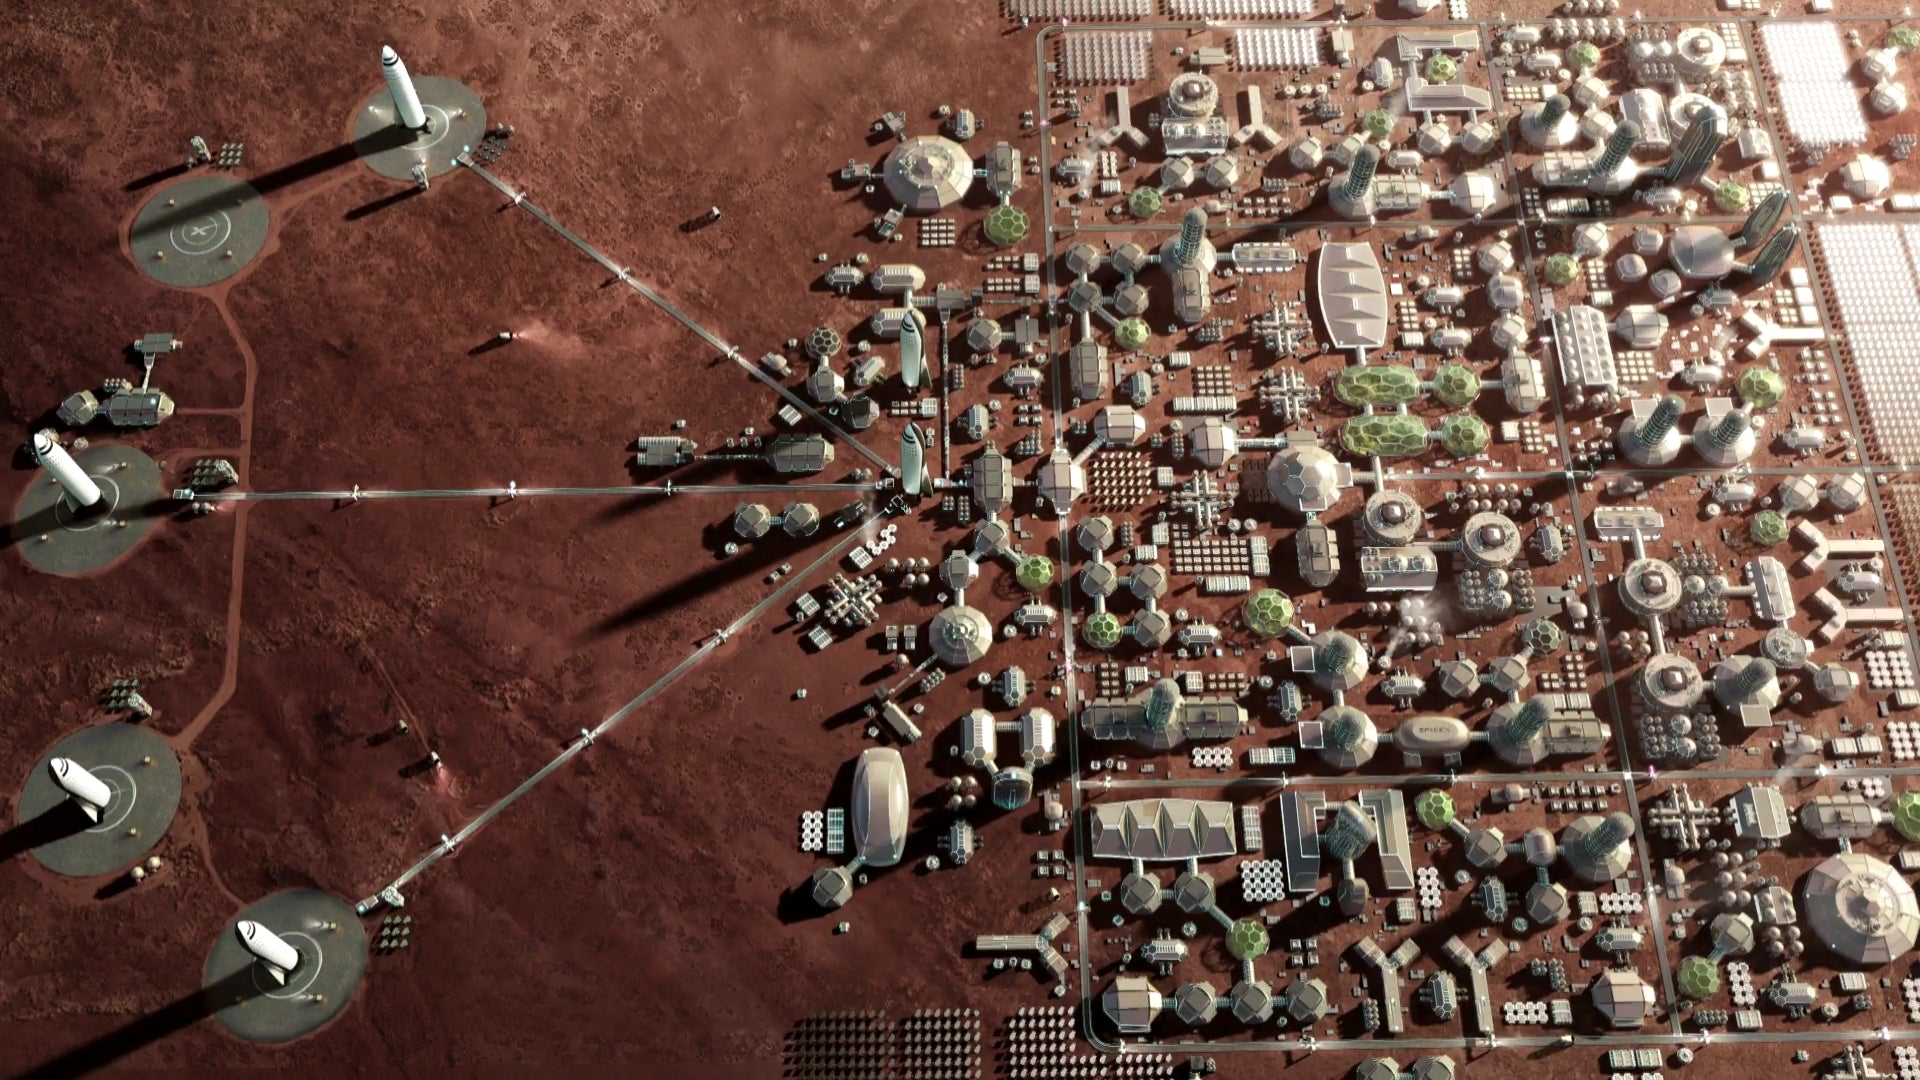 Elon Musk is 'accumulating resources to help make life multiplanetary'